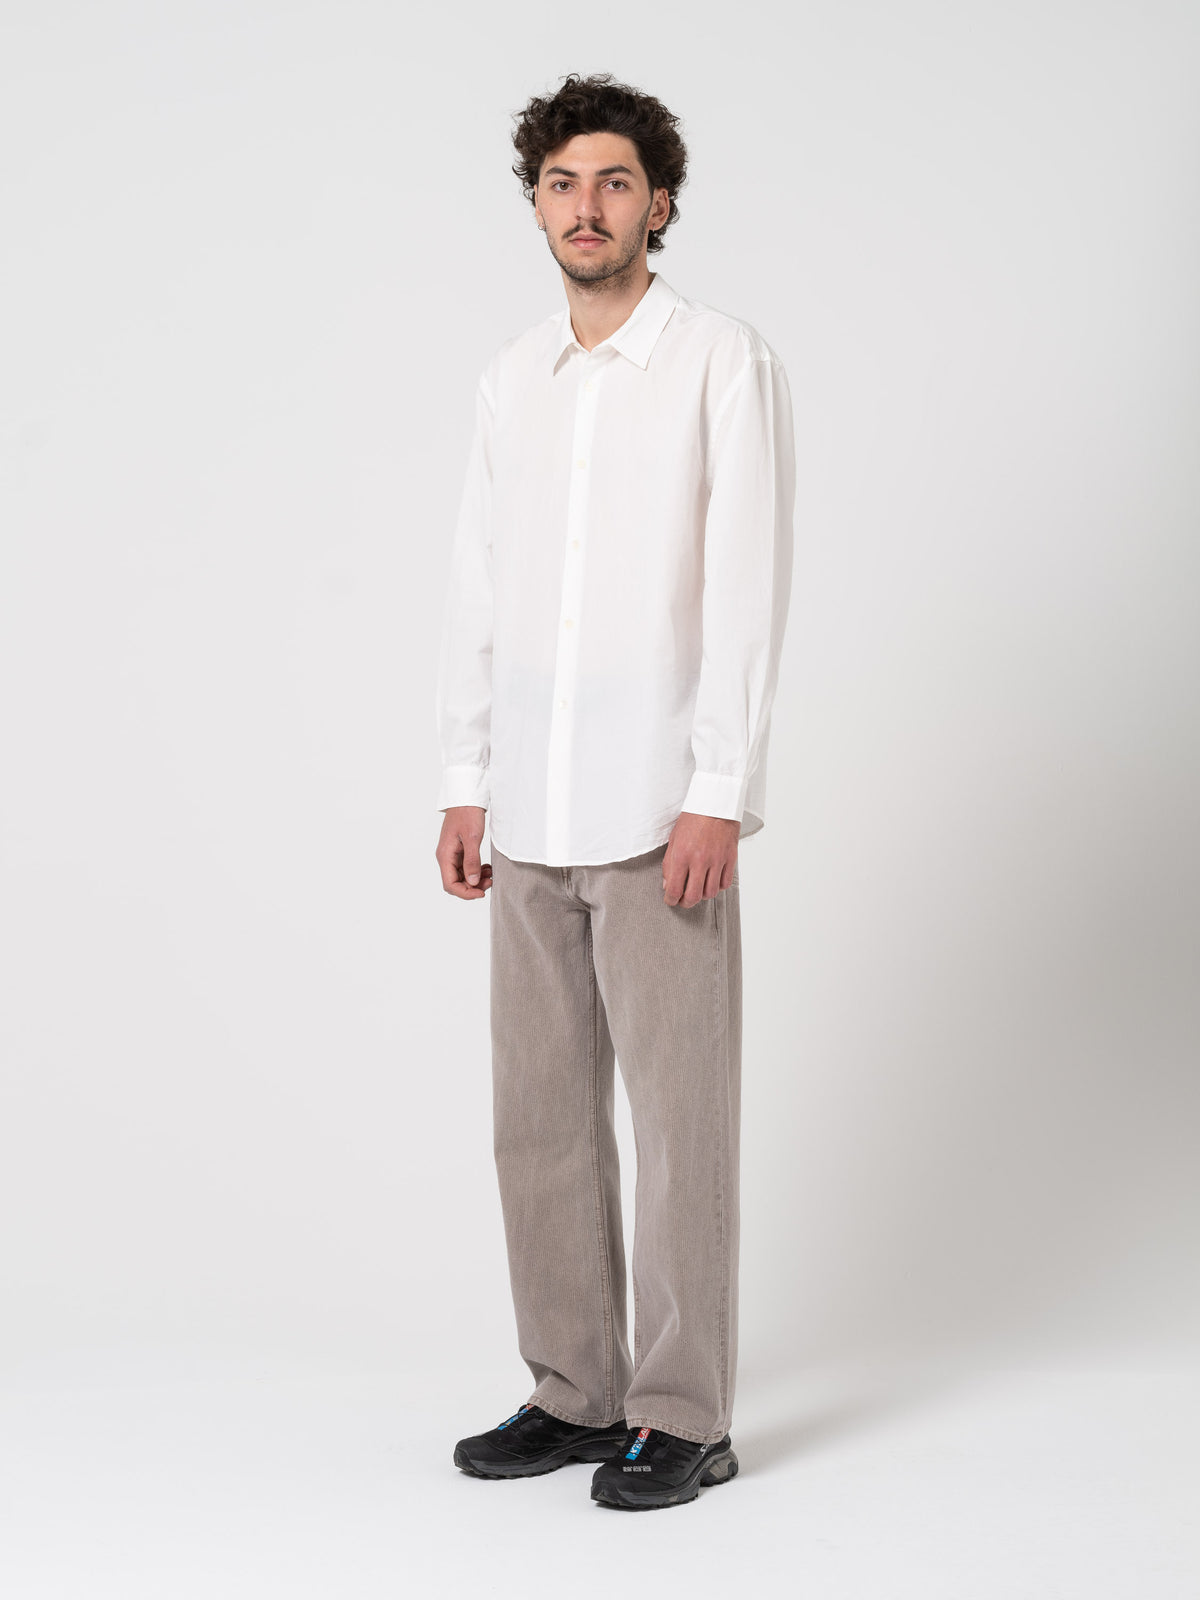 Chemise Formal, White Peached Cupro Poplin